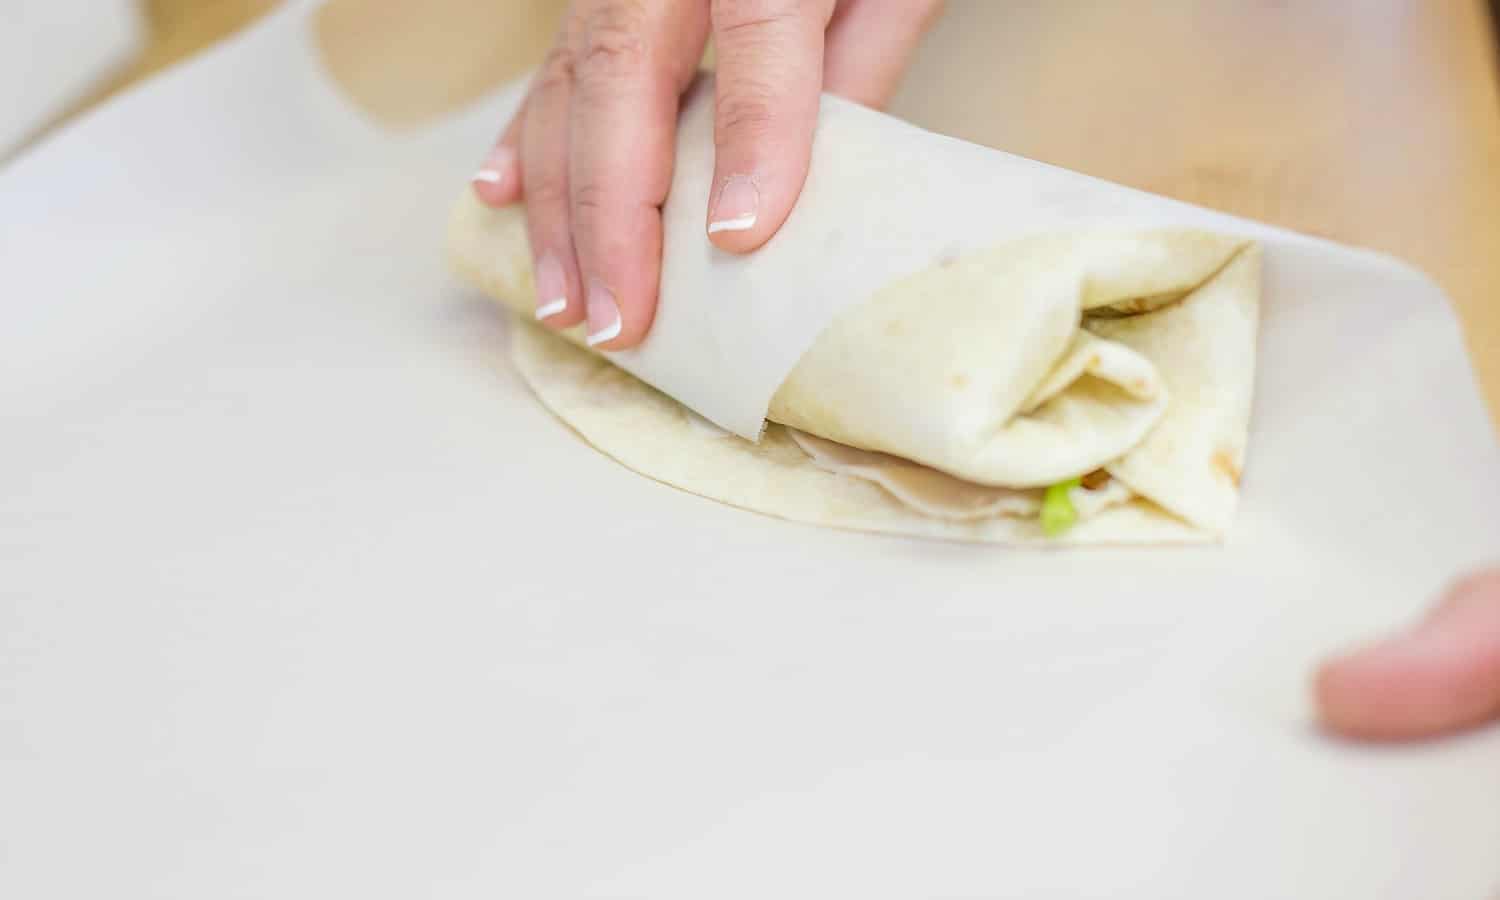 Roll the wrap, using parchment paper to get a tight roll, while folding in the ends like a burrito.